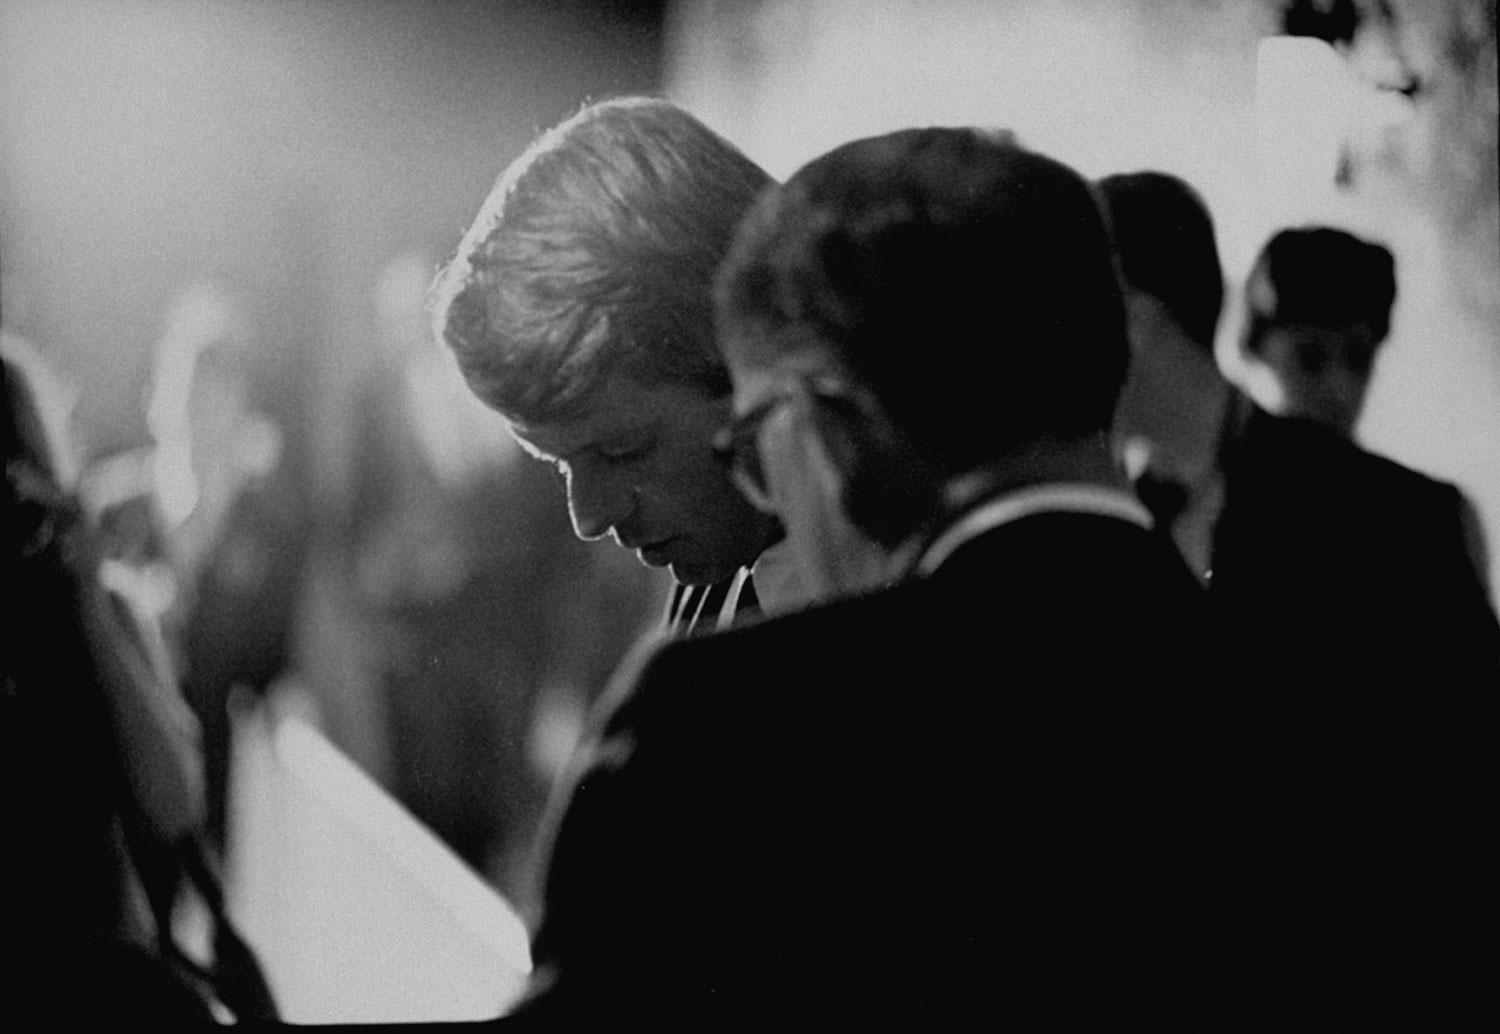 Sen. Robert Kennedy confers with an aide during his run for the Democratic presidential nomination in 1968.